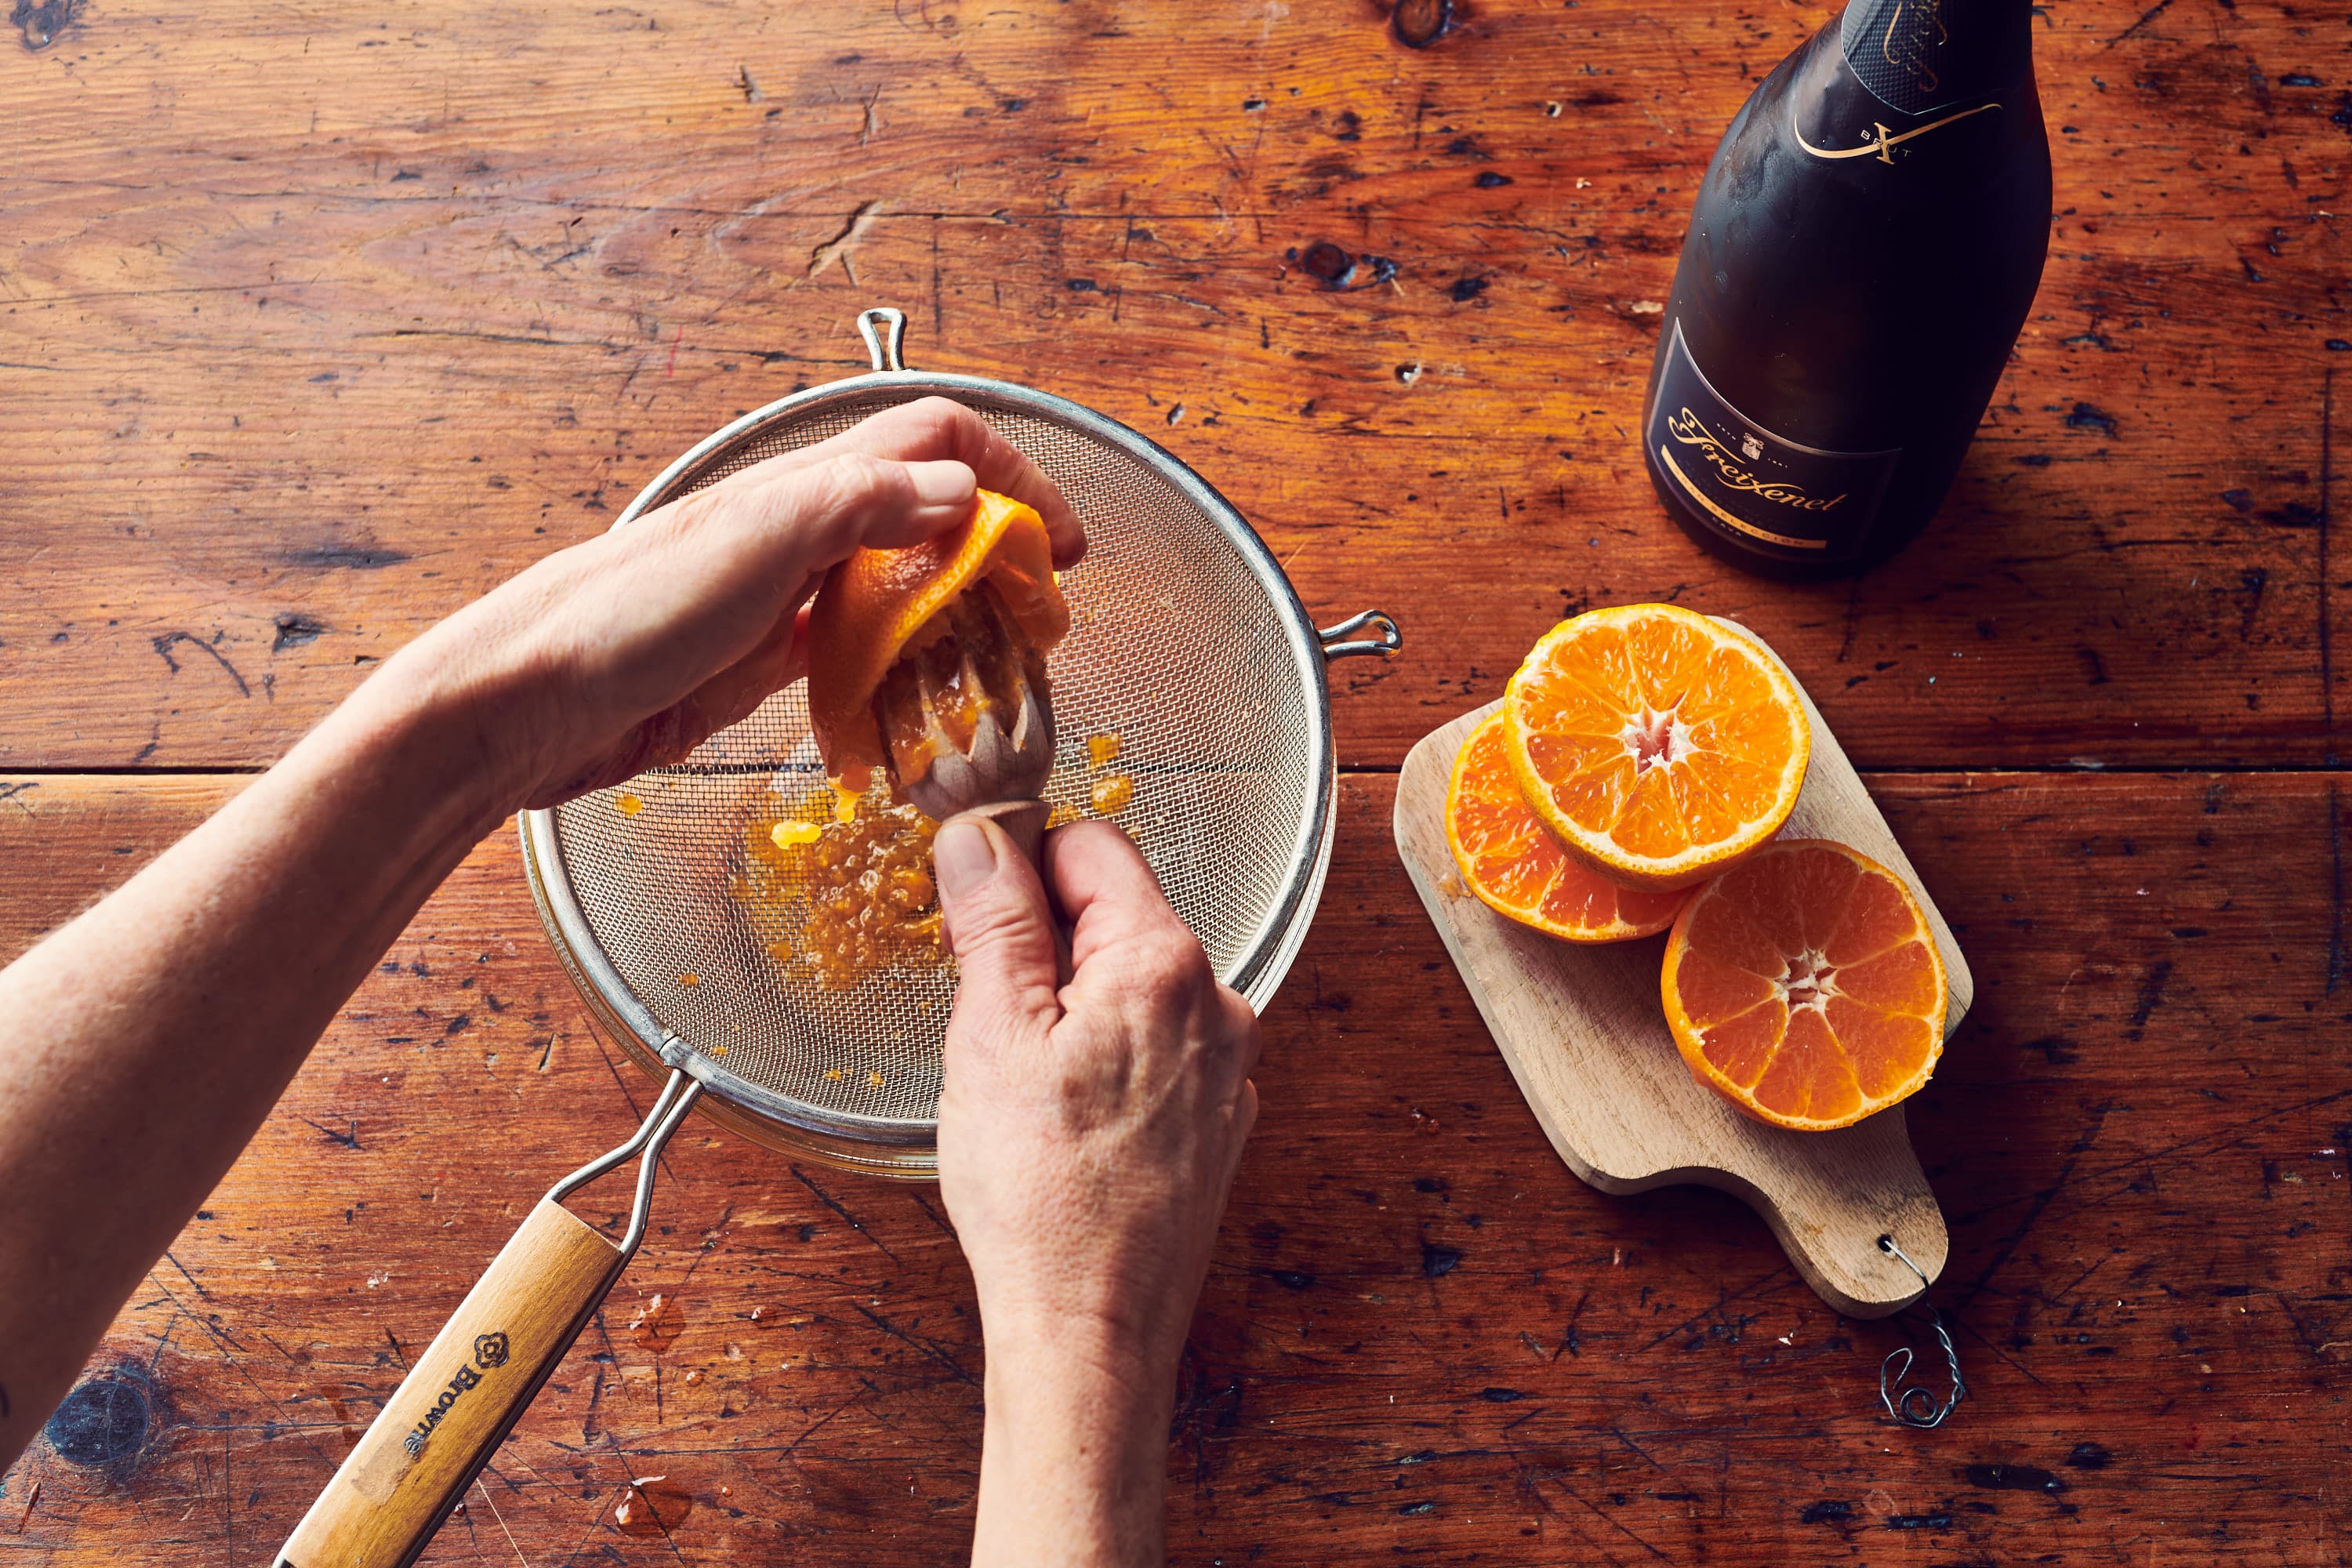 The Ultimate Guide to Mimosas - The Happier Homemaker